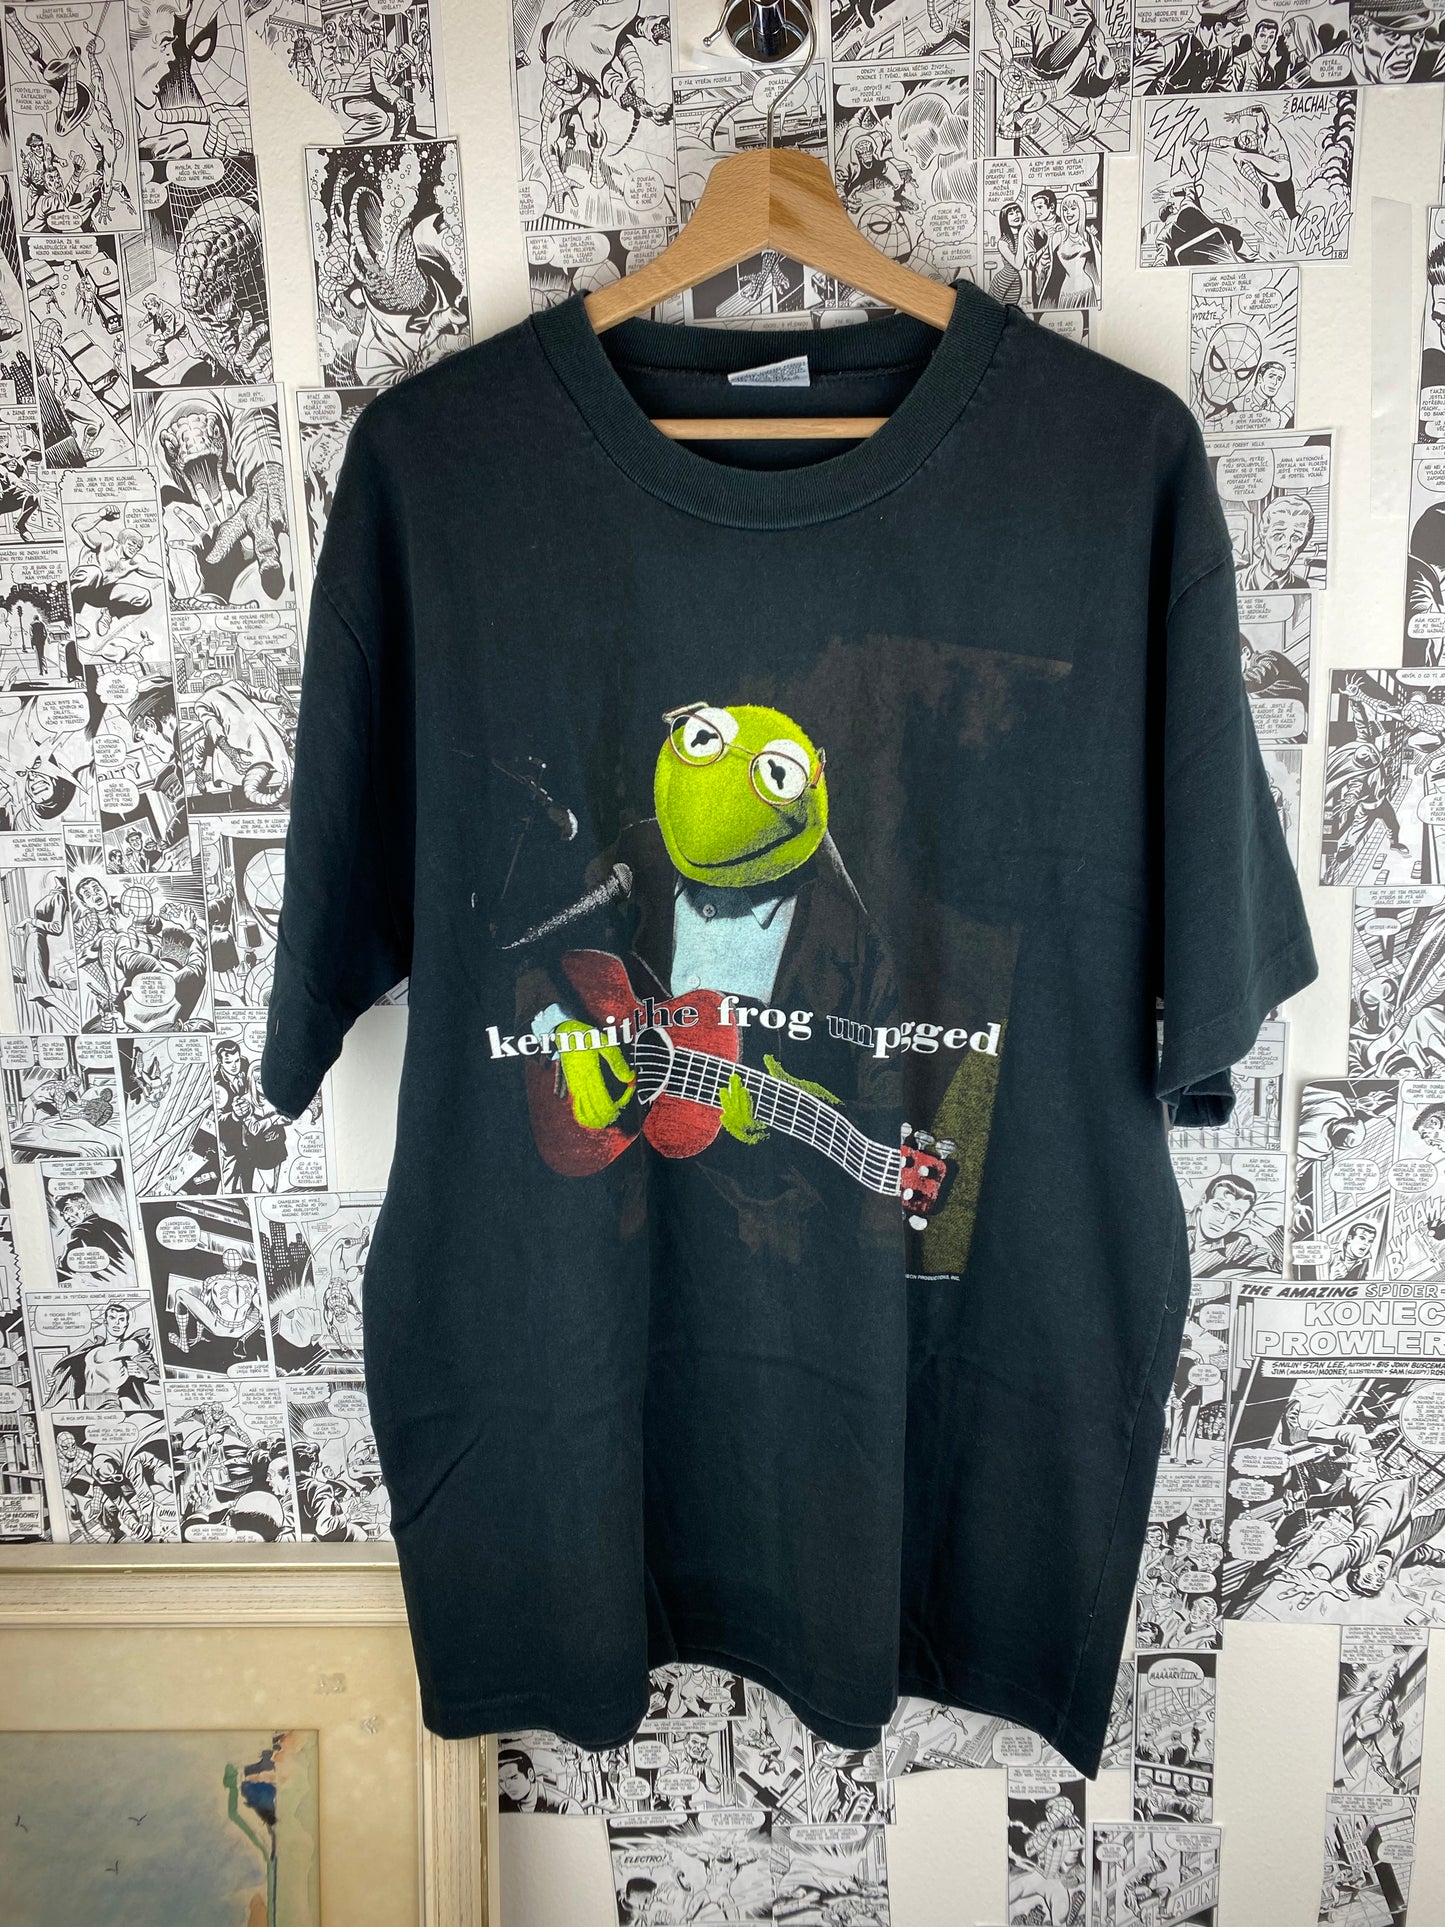 Vintage Muppets - Kermit the frog 80s/90s t-shirt - size XL